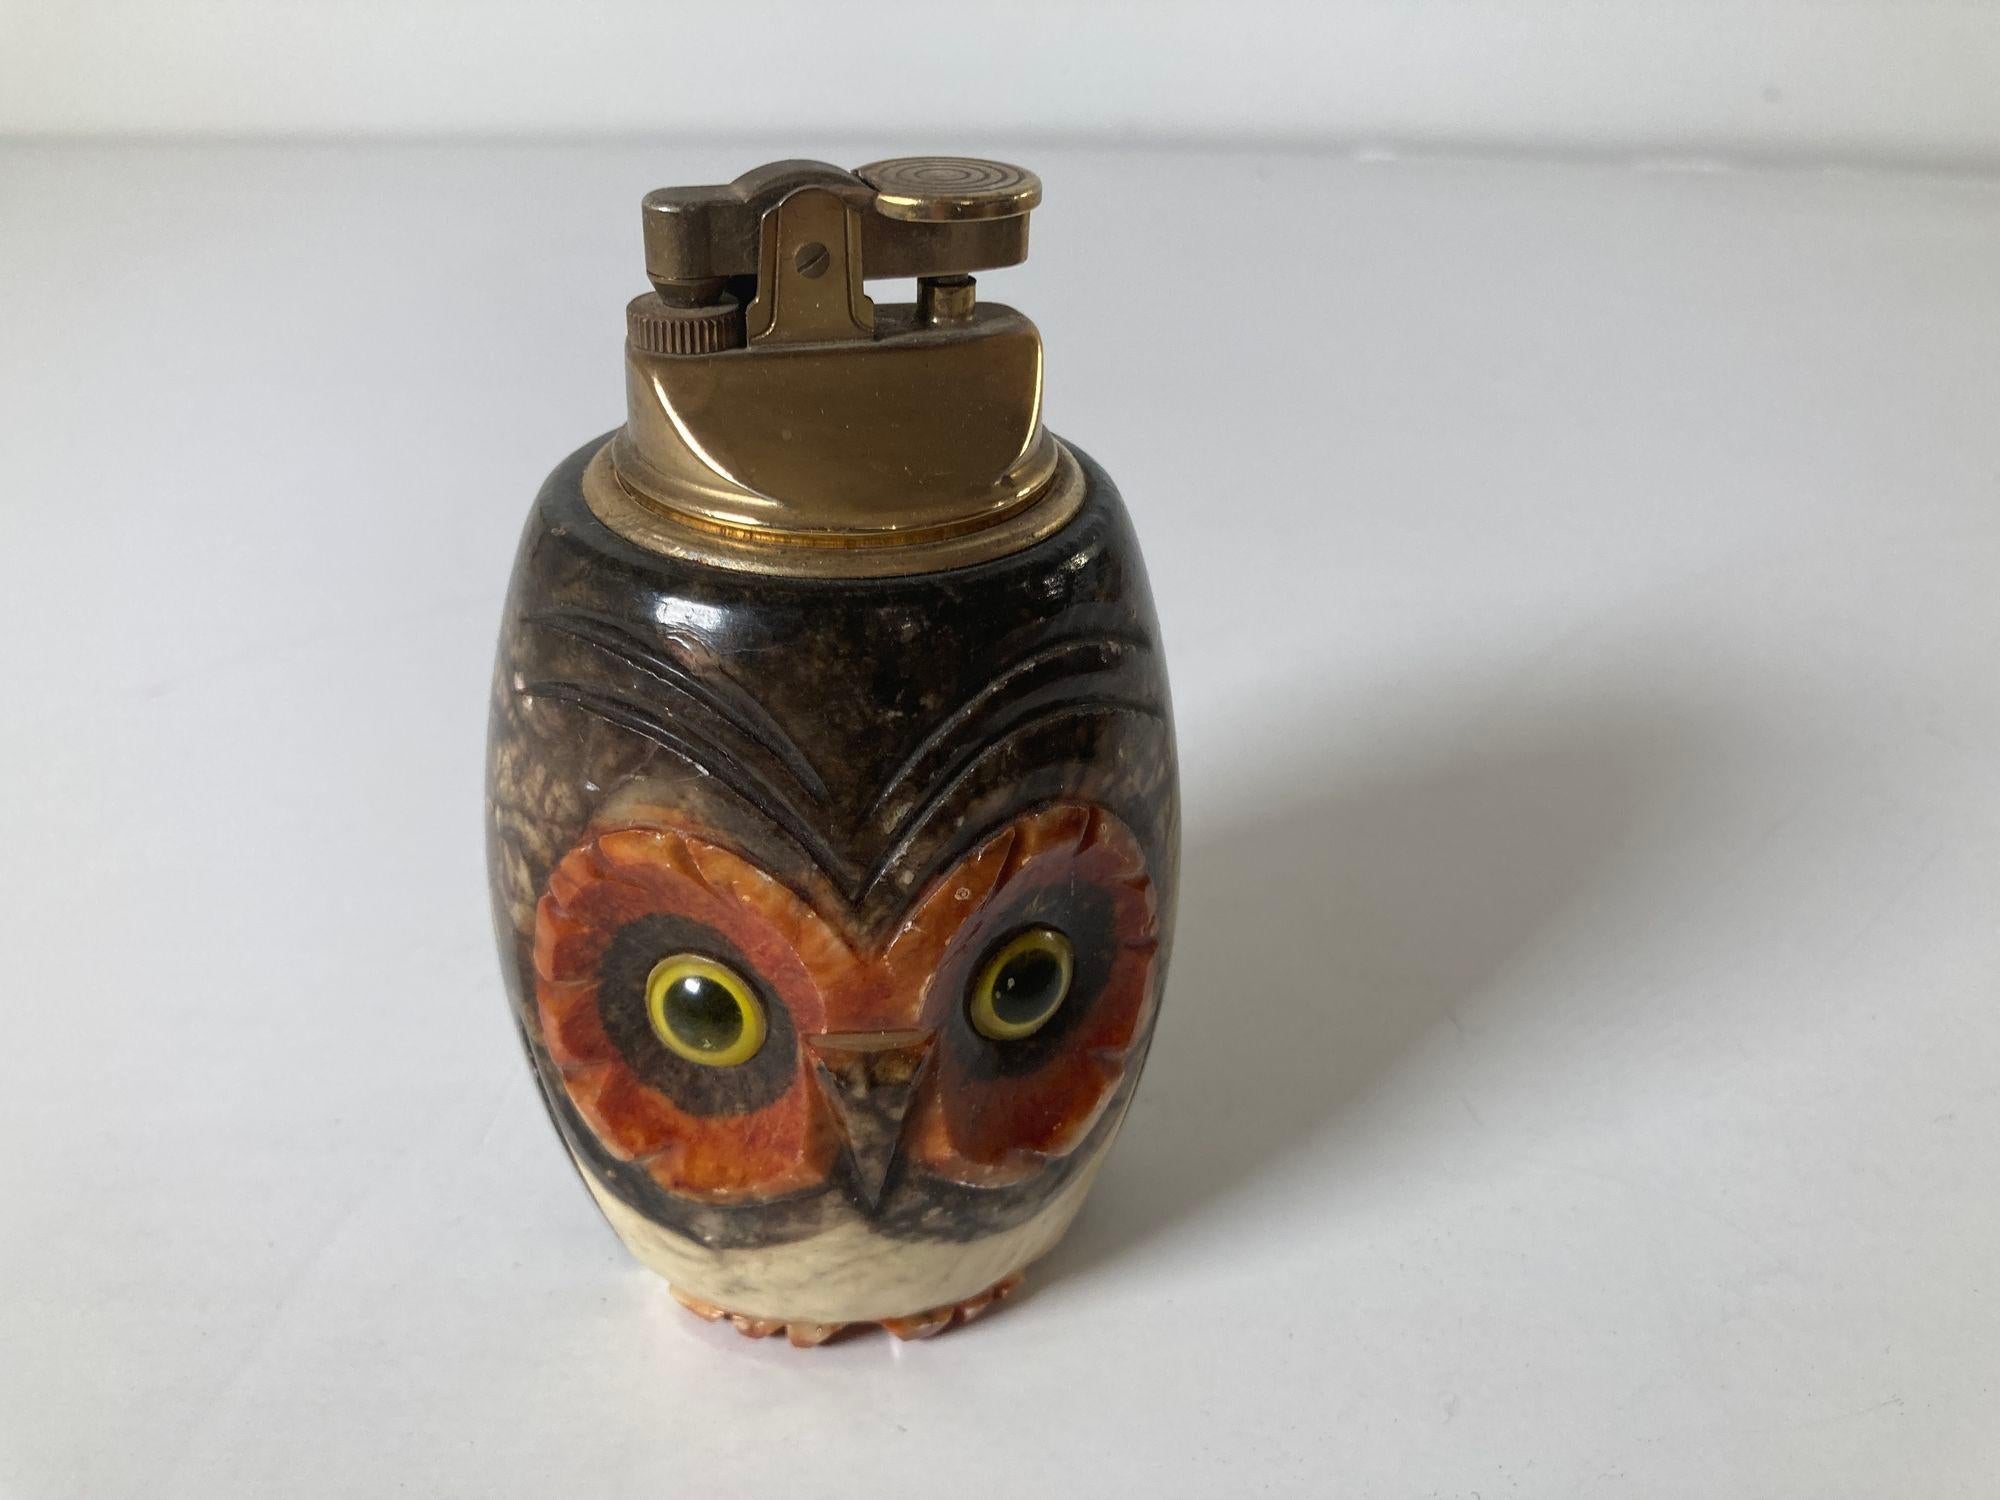 Vintage Italian Alabaster Owl Table Lighter.
Whimsical sculpture owl lighter in alabaster very collectible made in Italy.
Glass eyes, red and beige tone and will make this a nice addition for a desk, study shelf décor or your owl